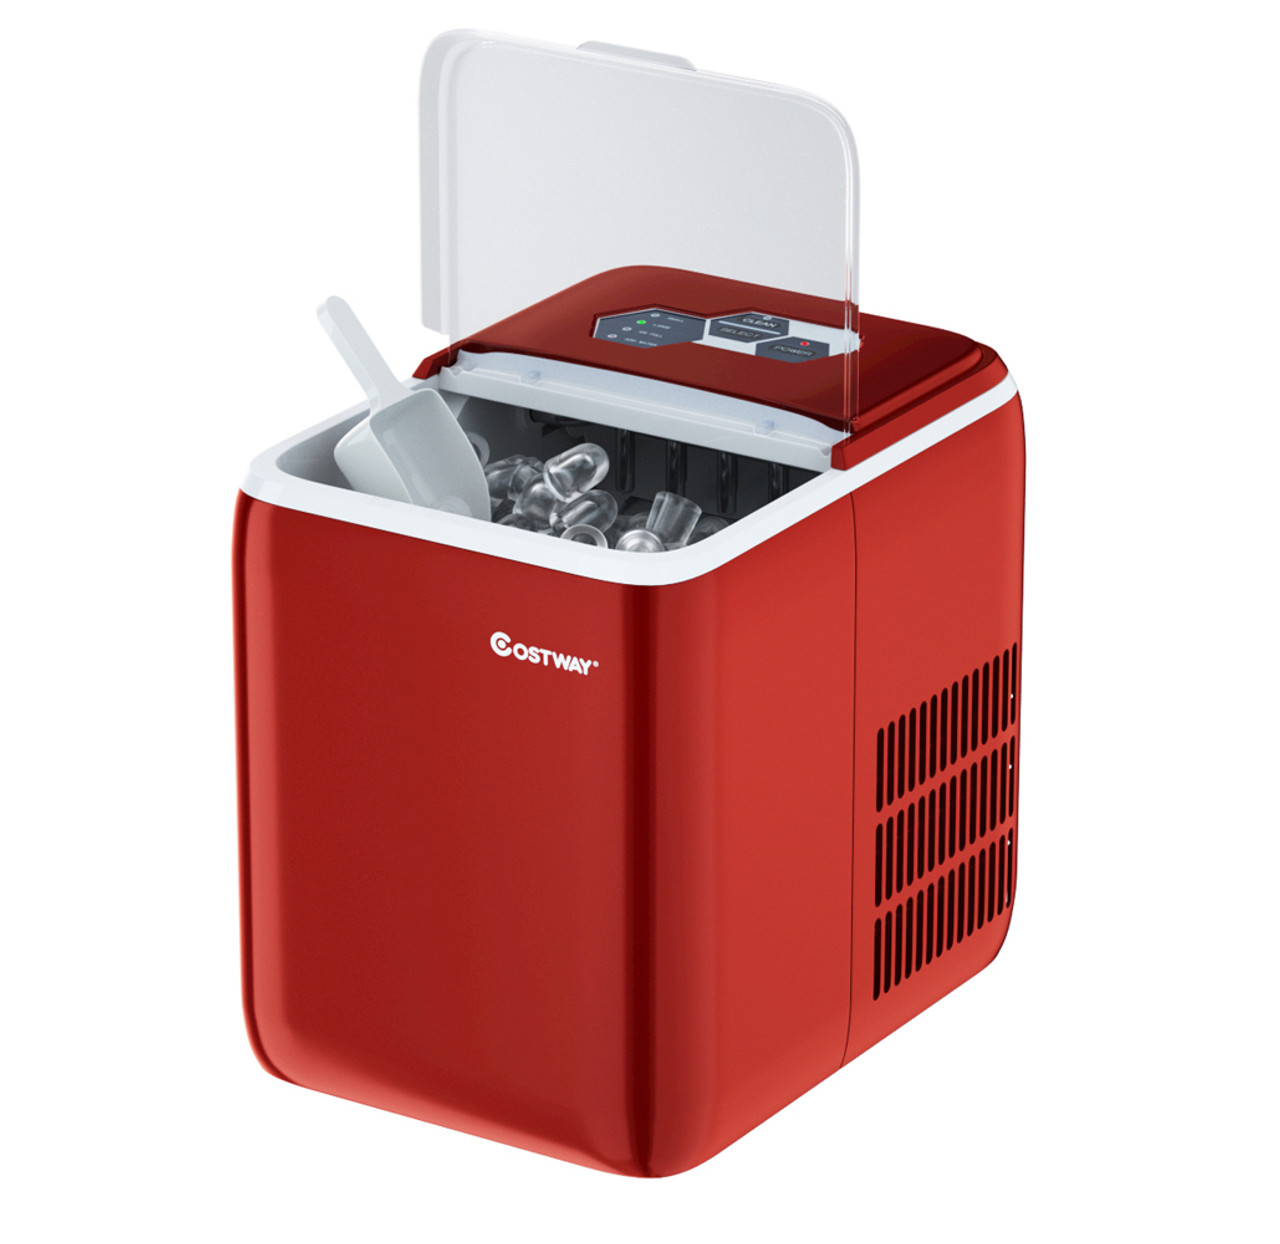 44 lbs Portable Countertop Ice Maker Machine with Scoop-Red